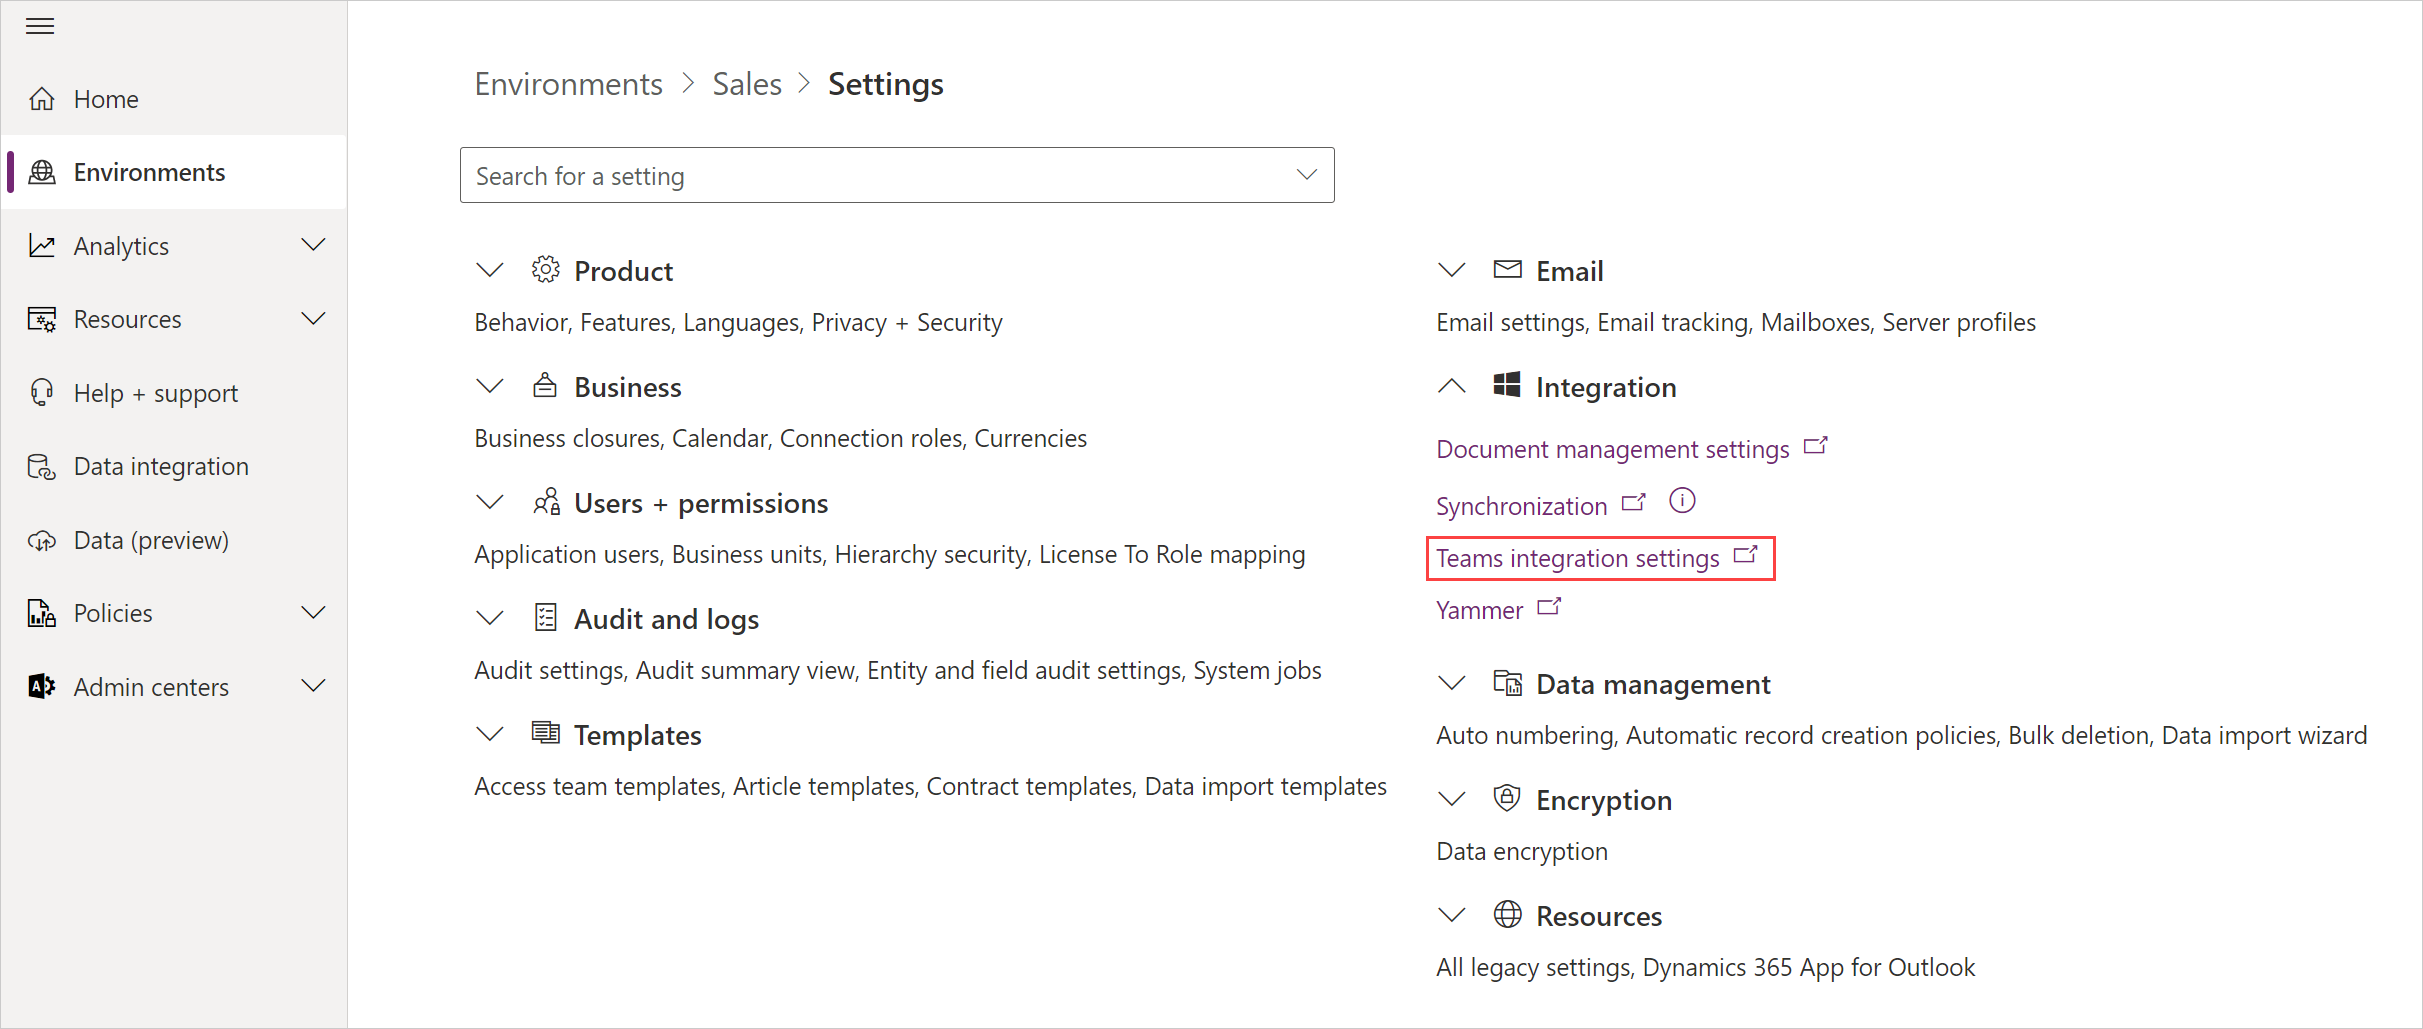 Enable Teams chat from Power Platform admin center